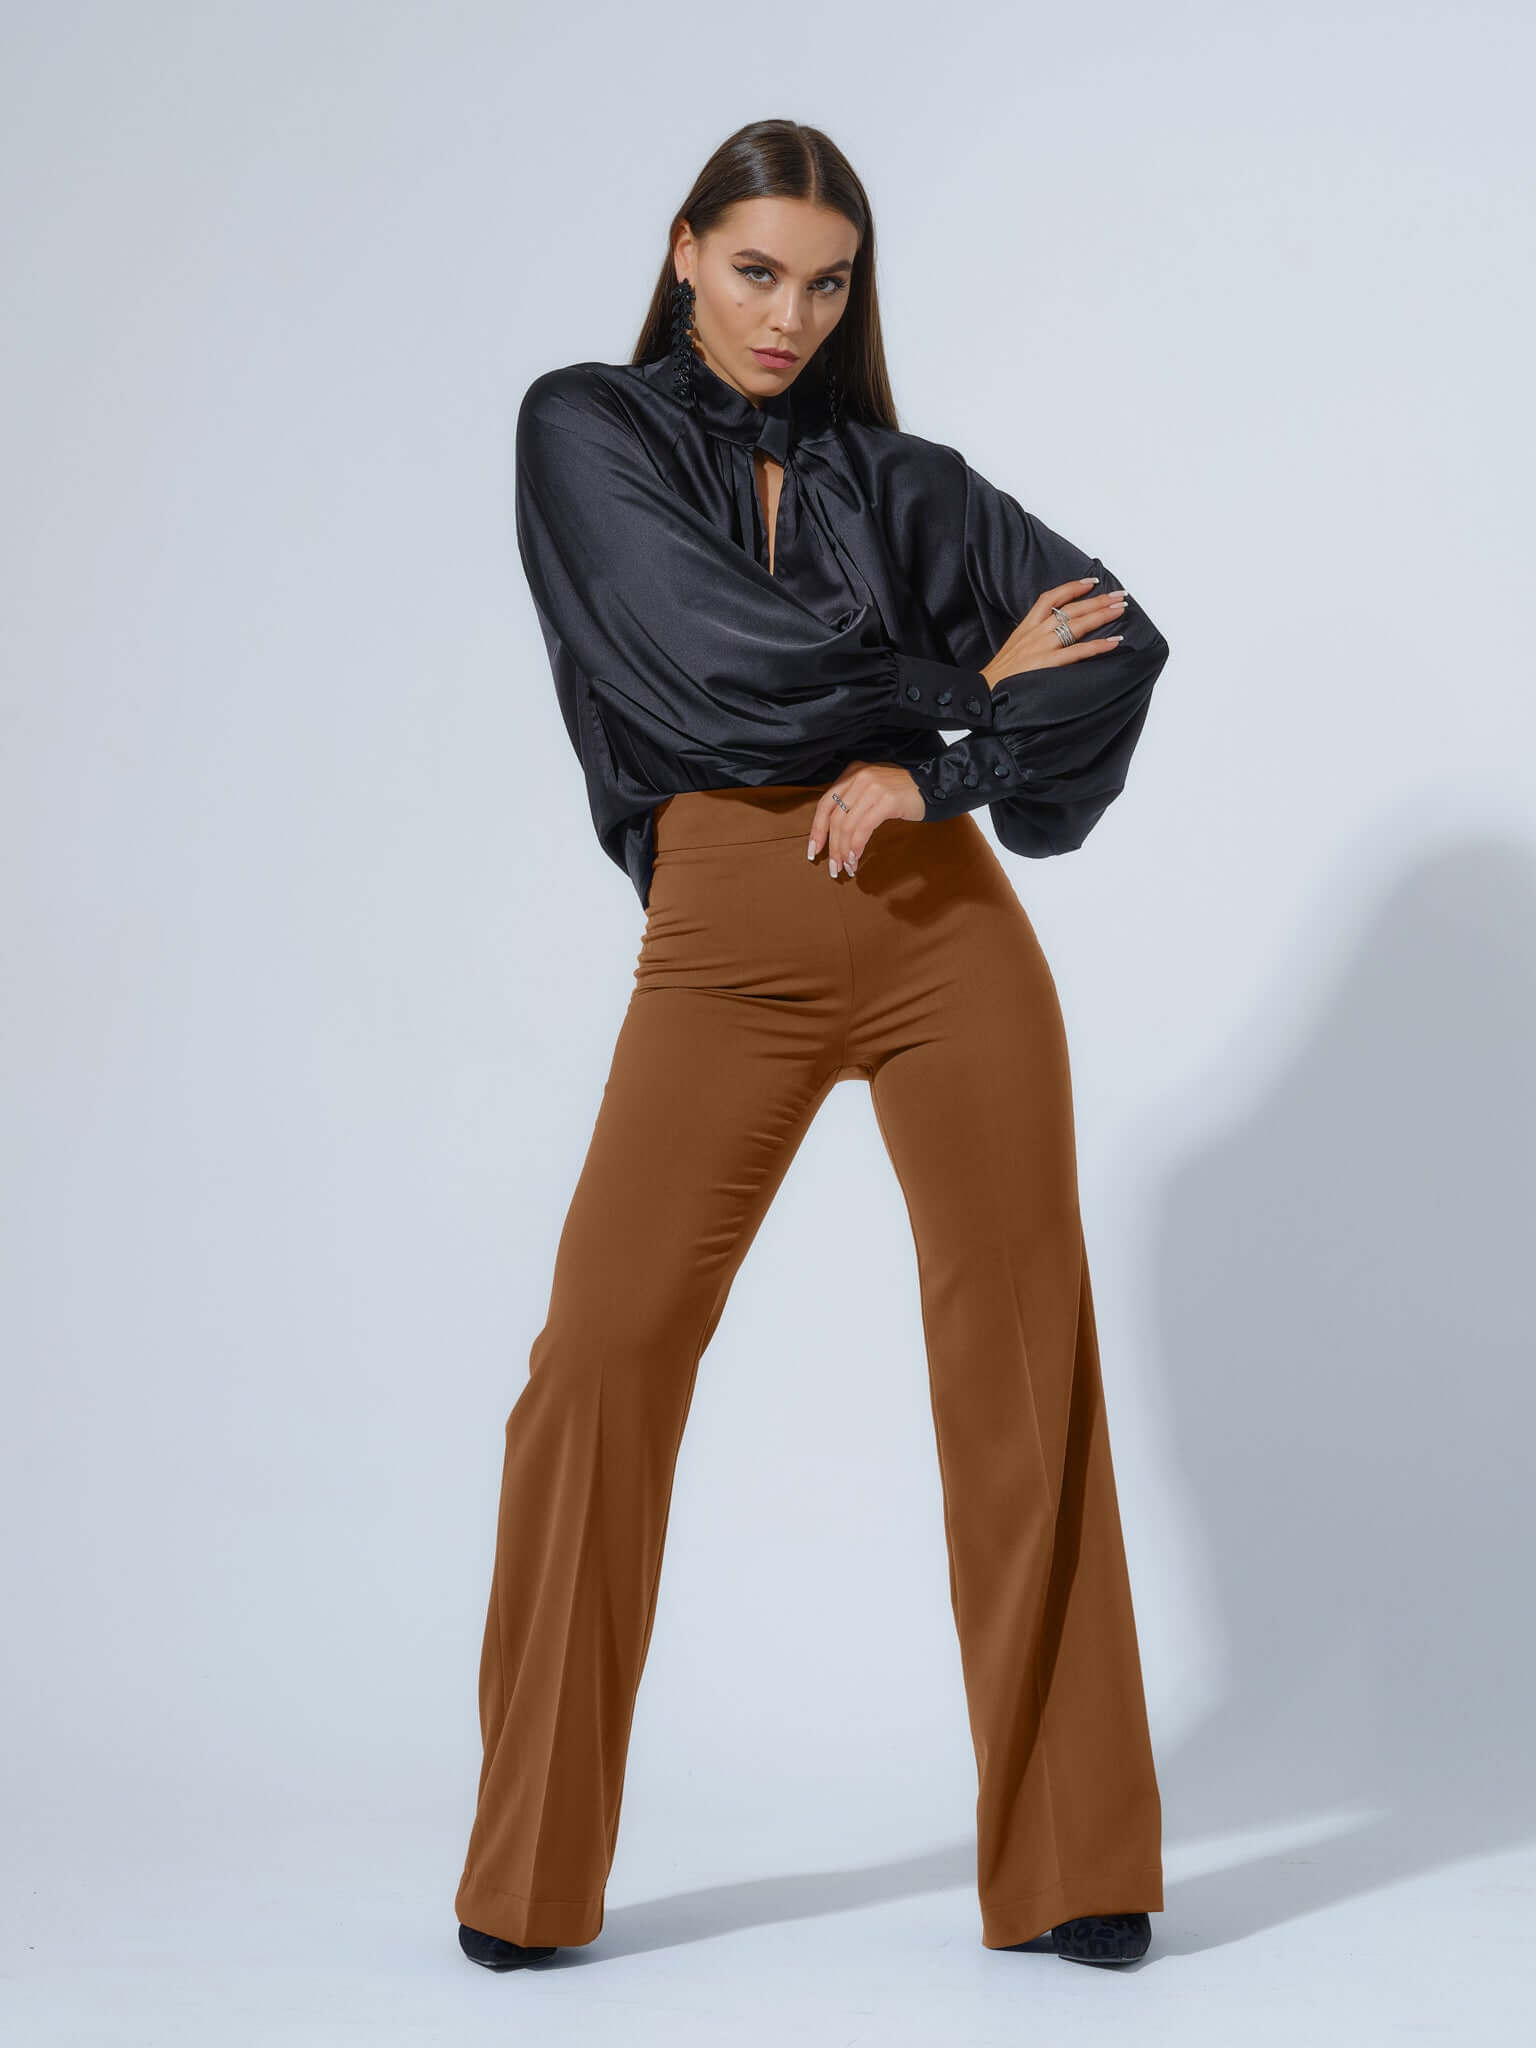 ASOS DESIGN extreme flare trousers in black | ASOS